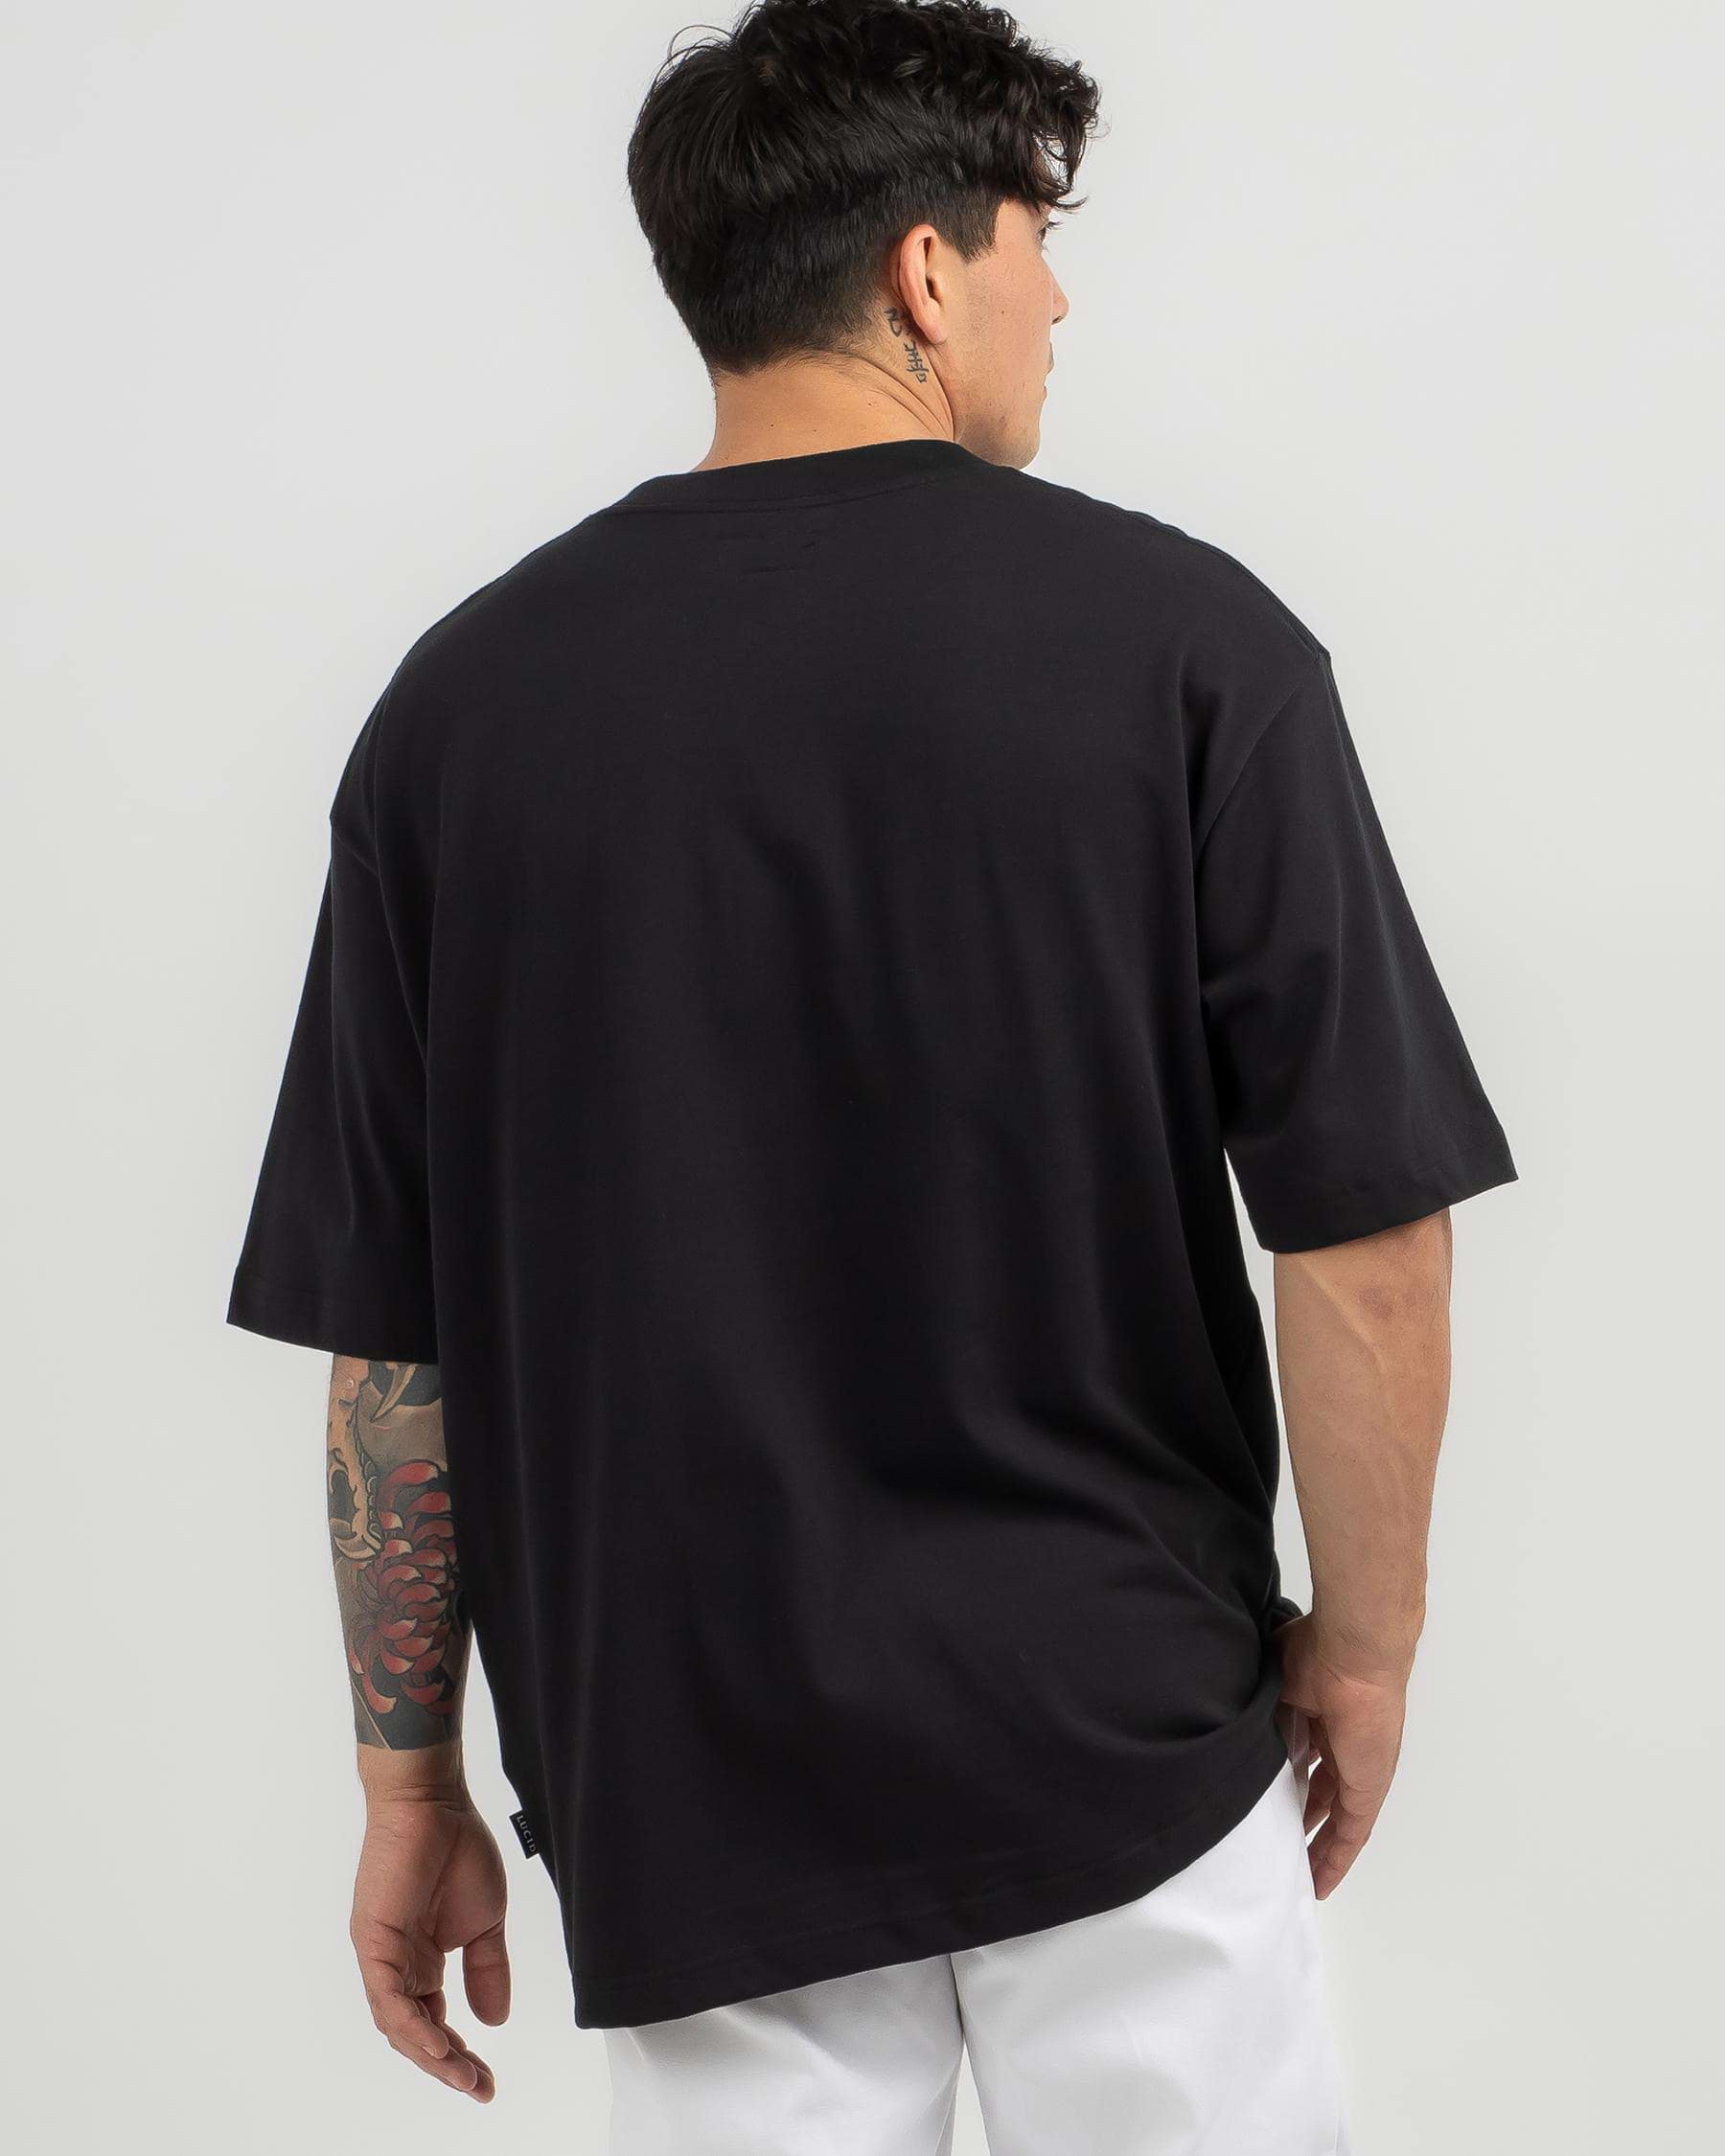 Lucid Manner T-Shirt In Washed Black - Fast Shipping & Easy Returns ...